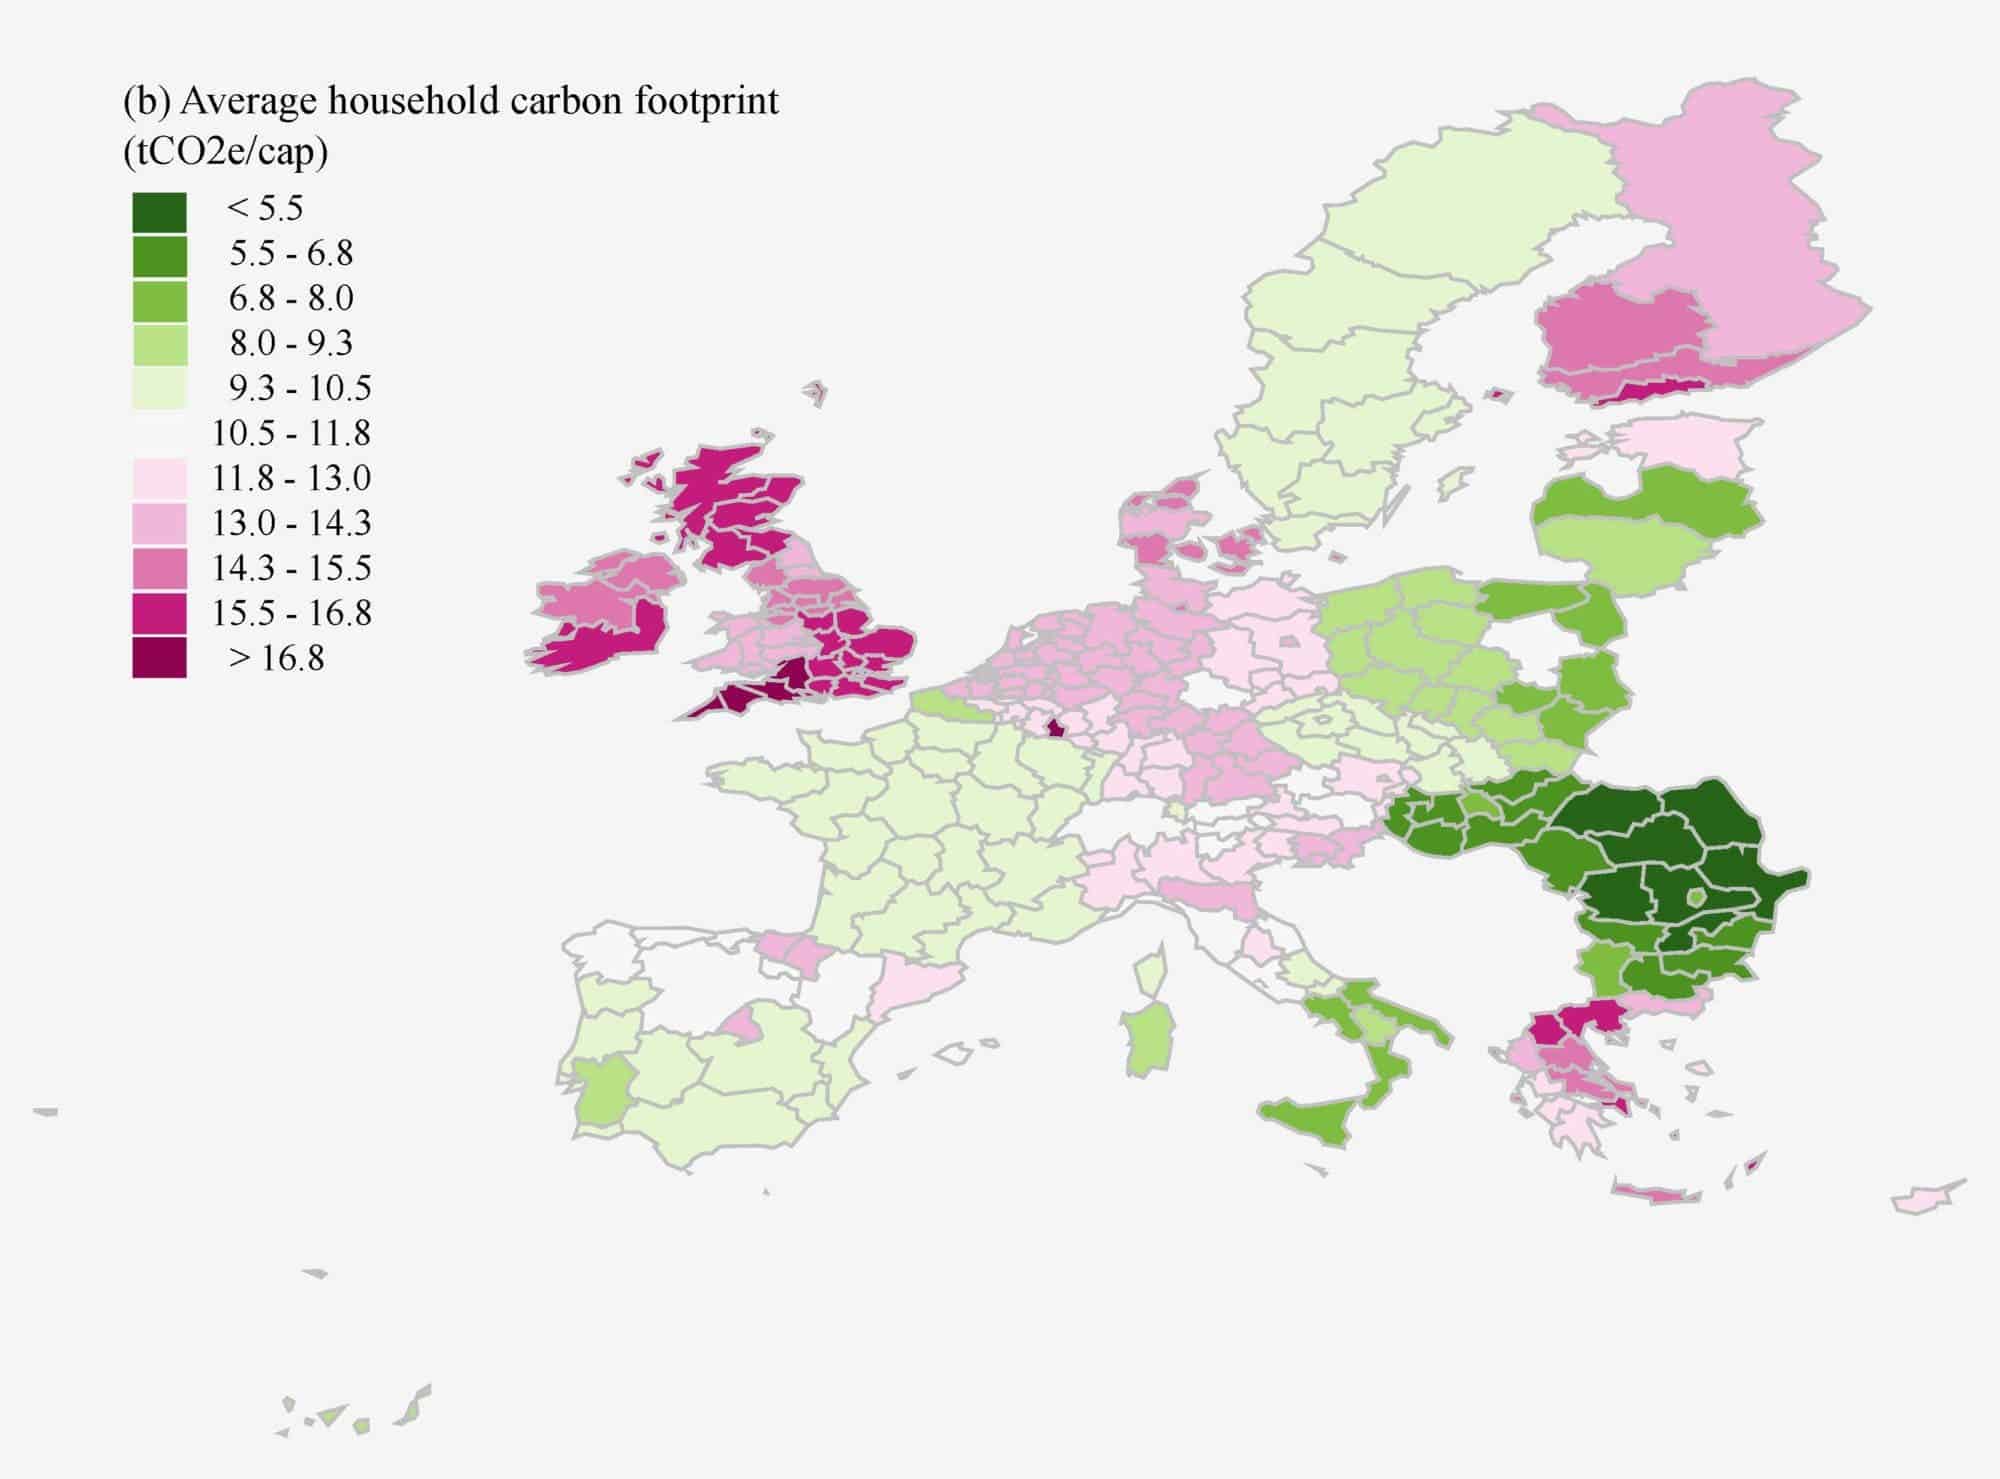 The average household carbon footprint for different EU regions. The UK has among the largest carbon footprints of any European country. Graphic: Environmental Research Letters.